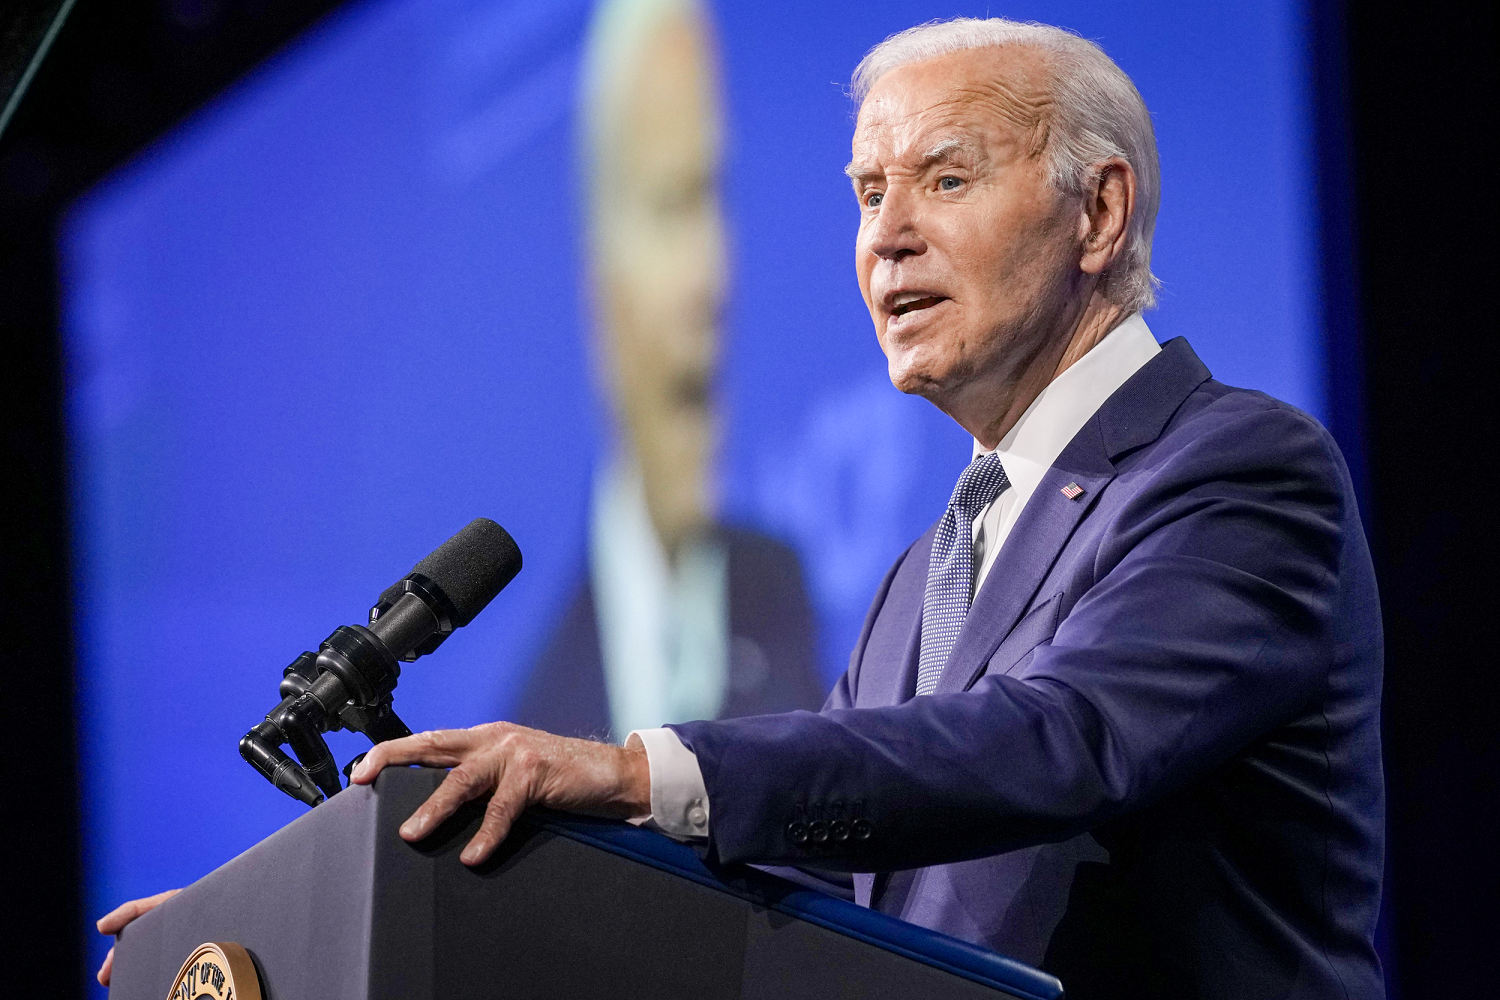 Democrats rush to decide Biden’s political future before it plunges into murky legal territory